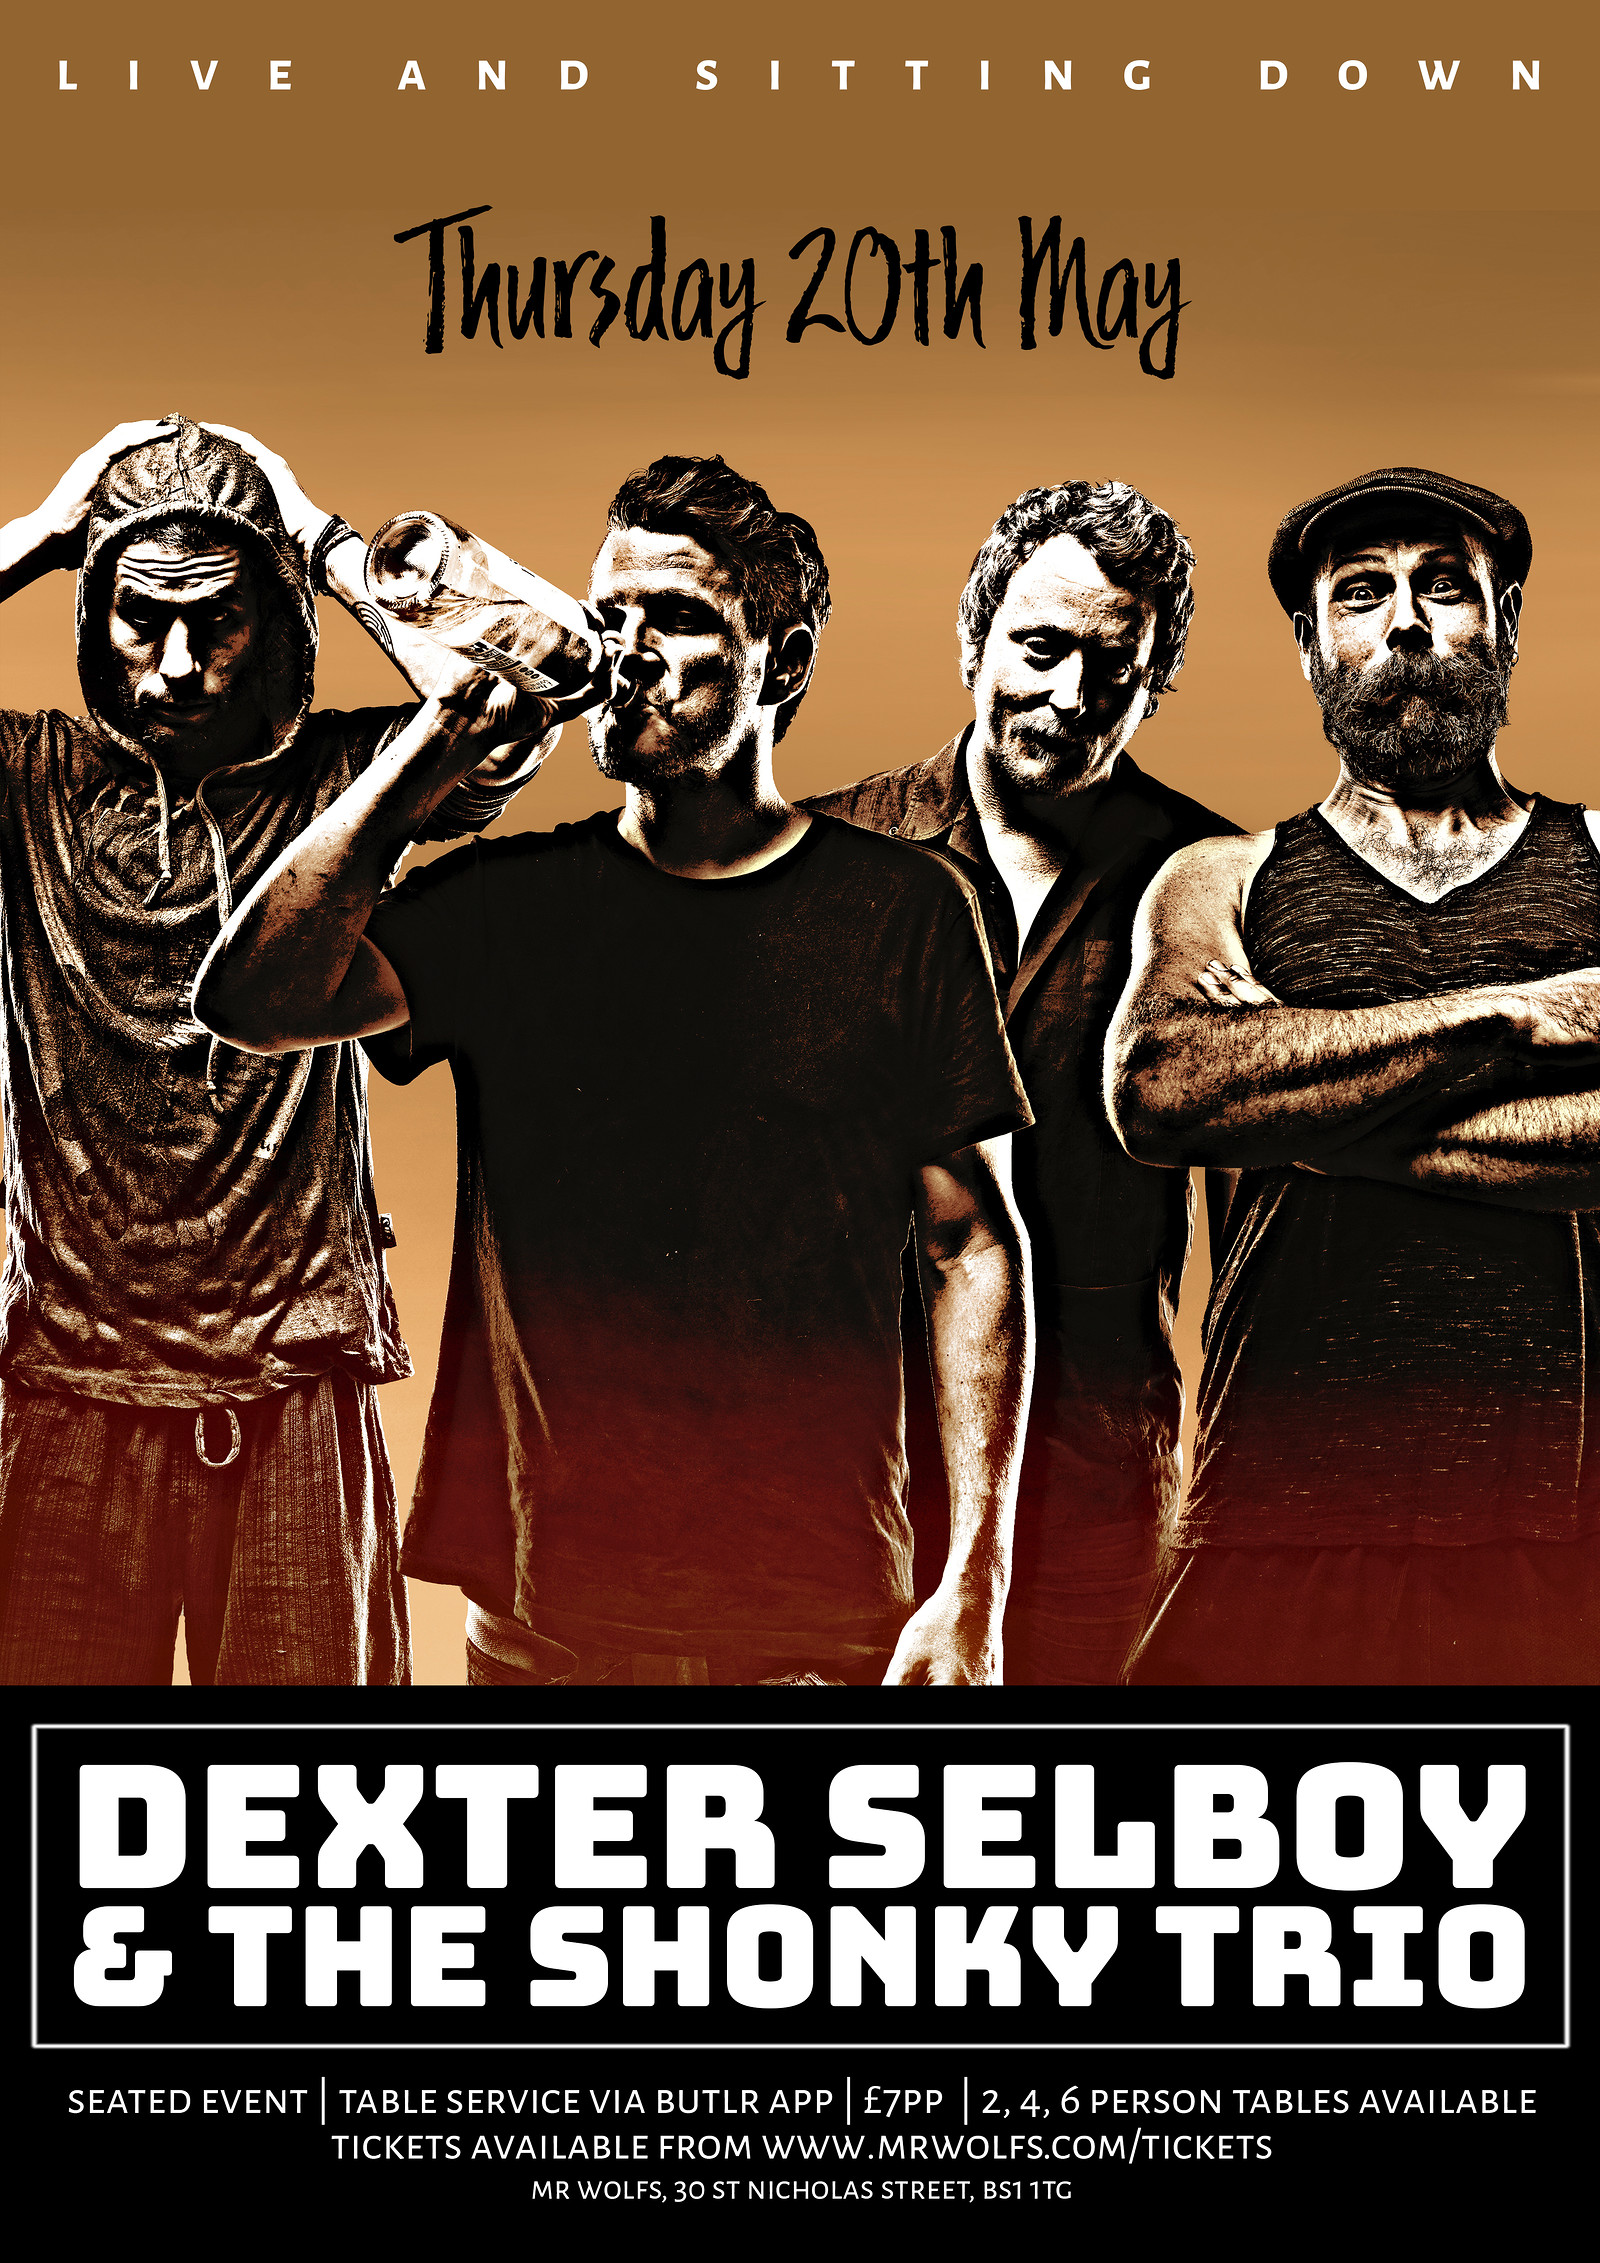 Dexter Selboy & The Shonky Trio at Mr Wolfs